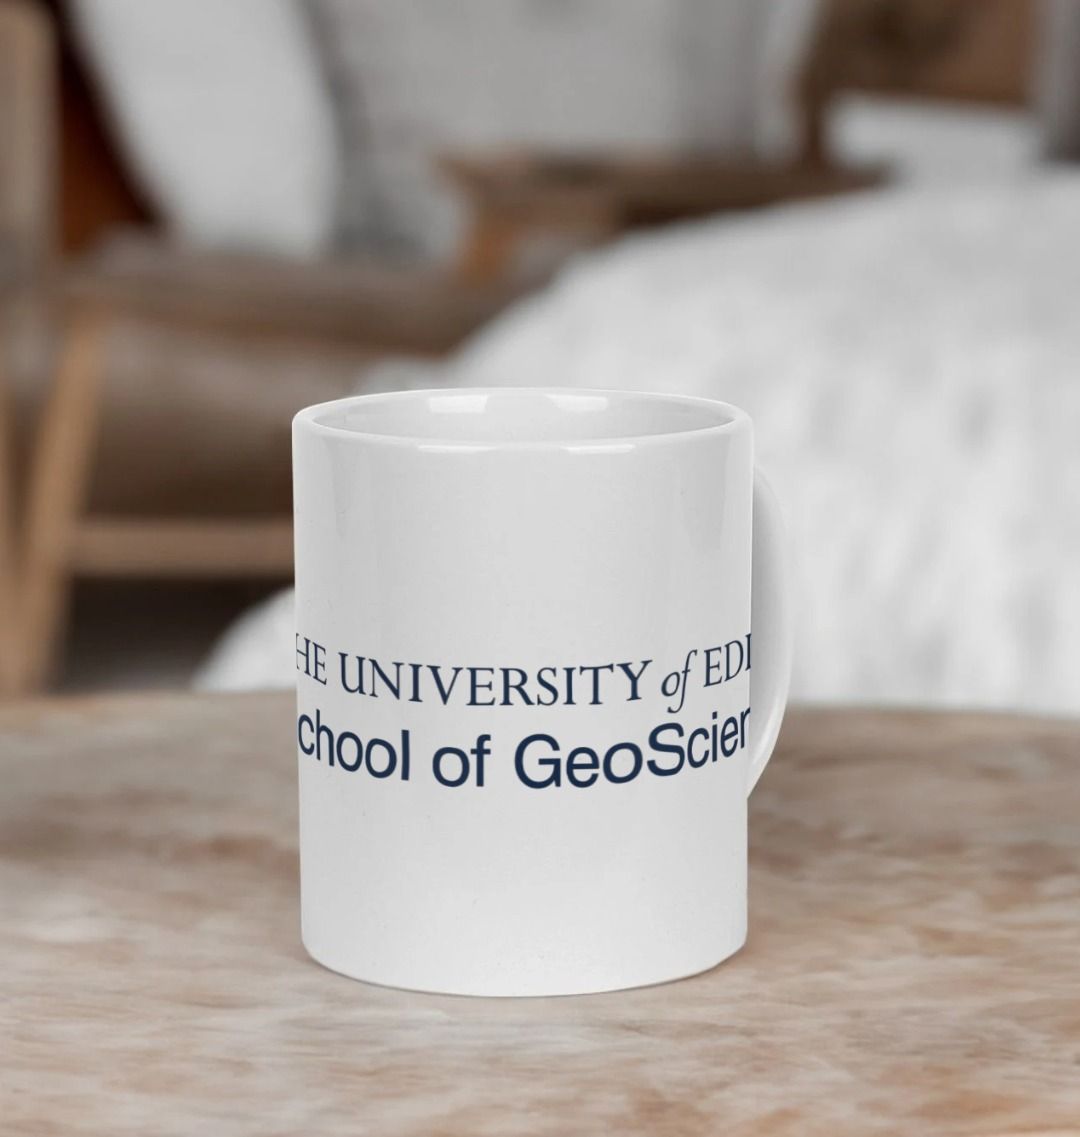 White School of GeoSciences mug with multi-colour printed University crest and logo